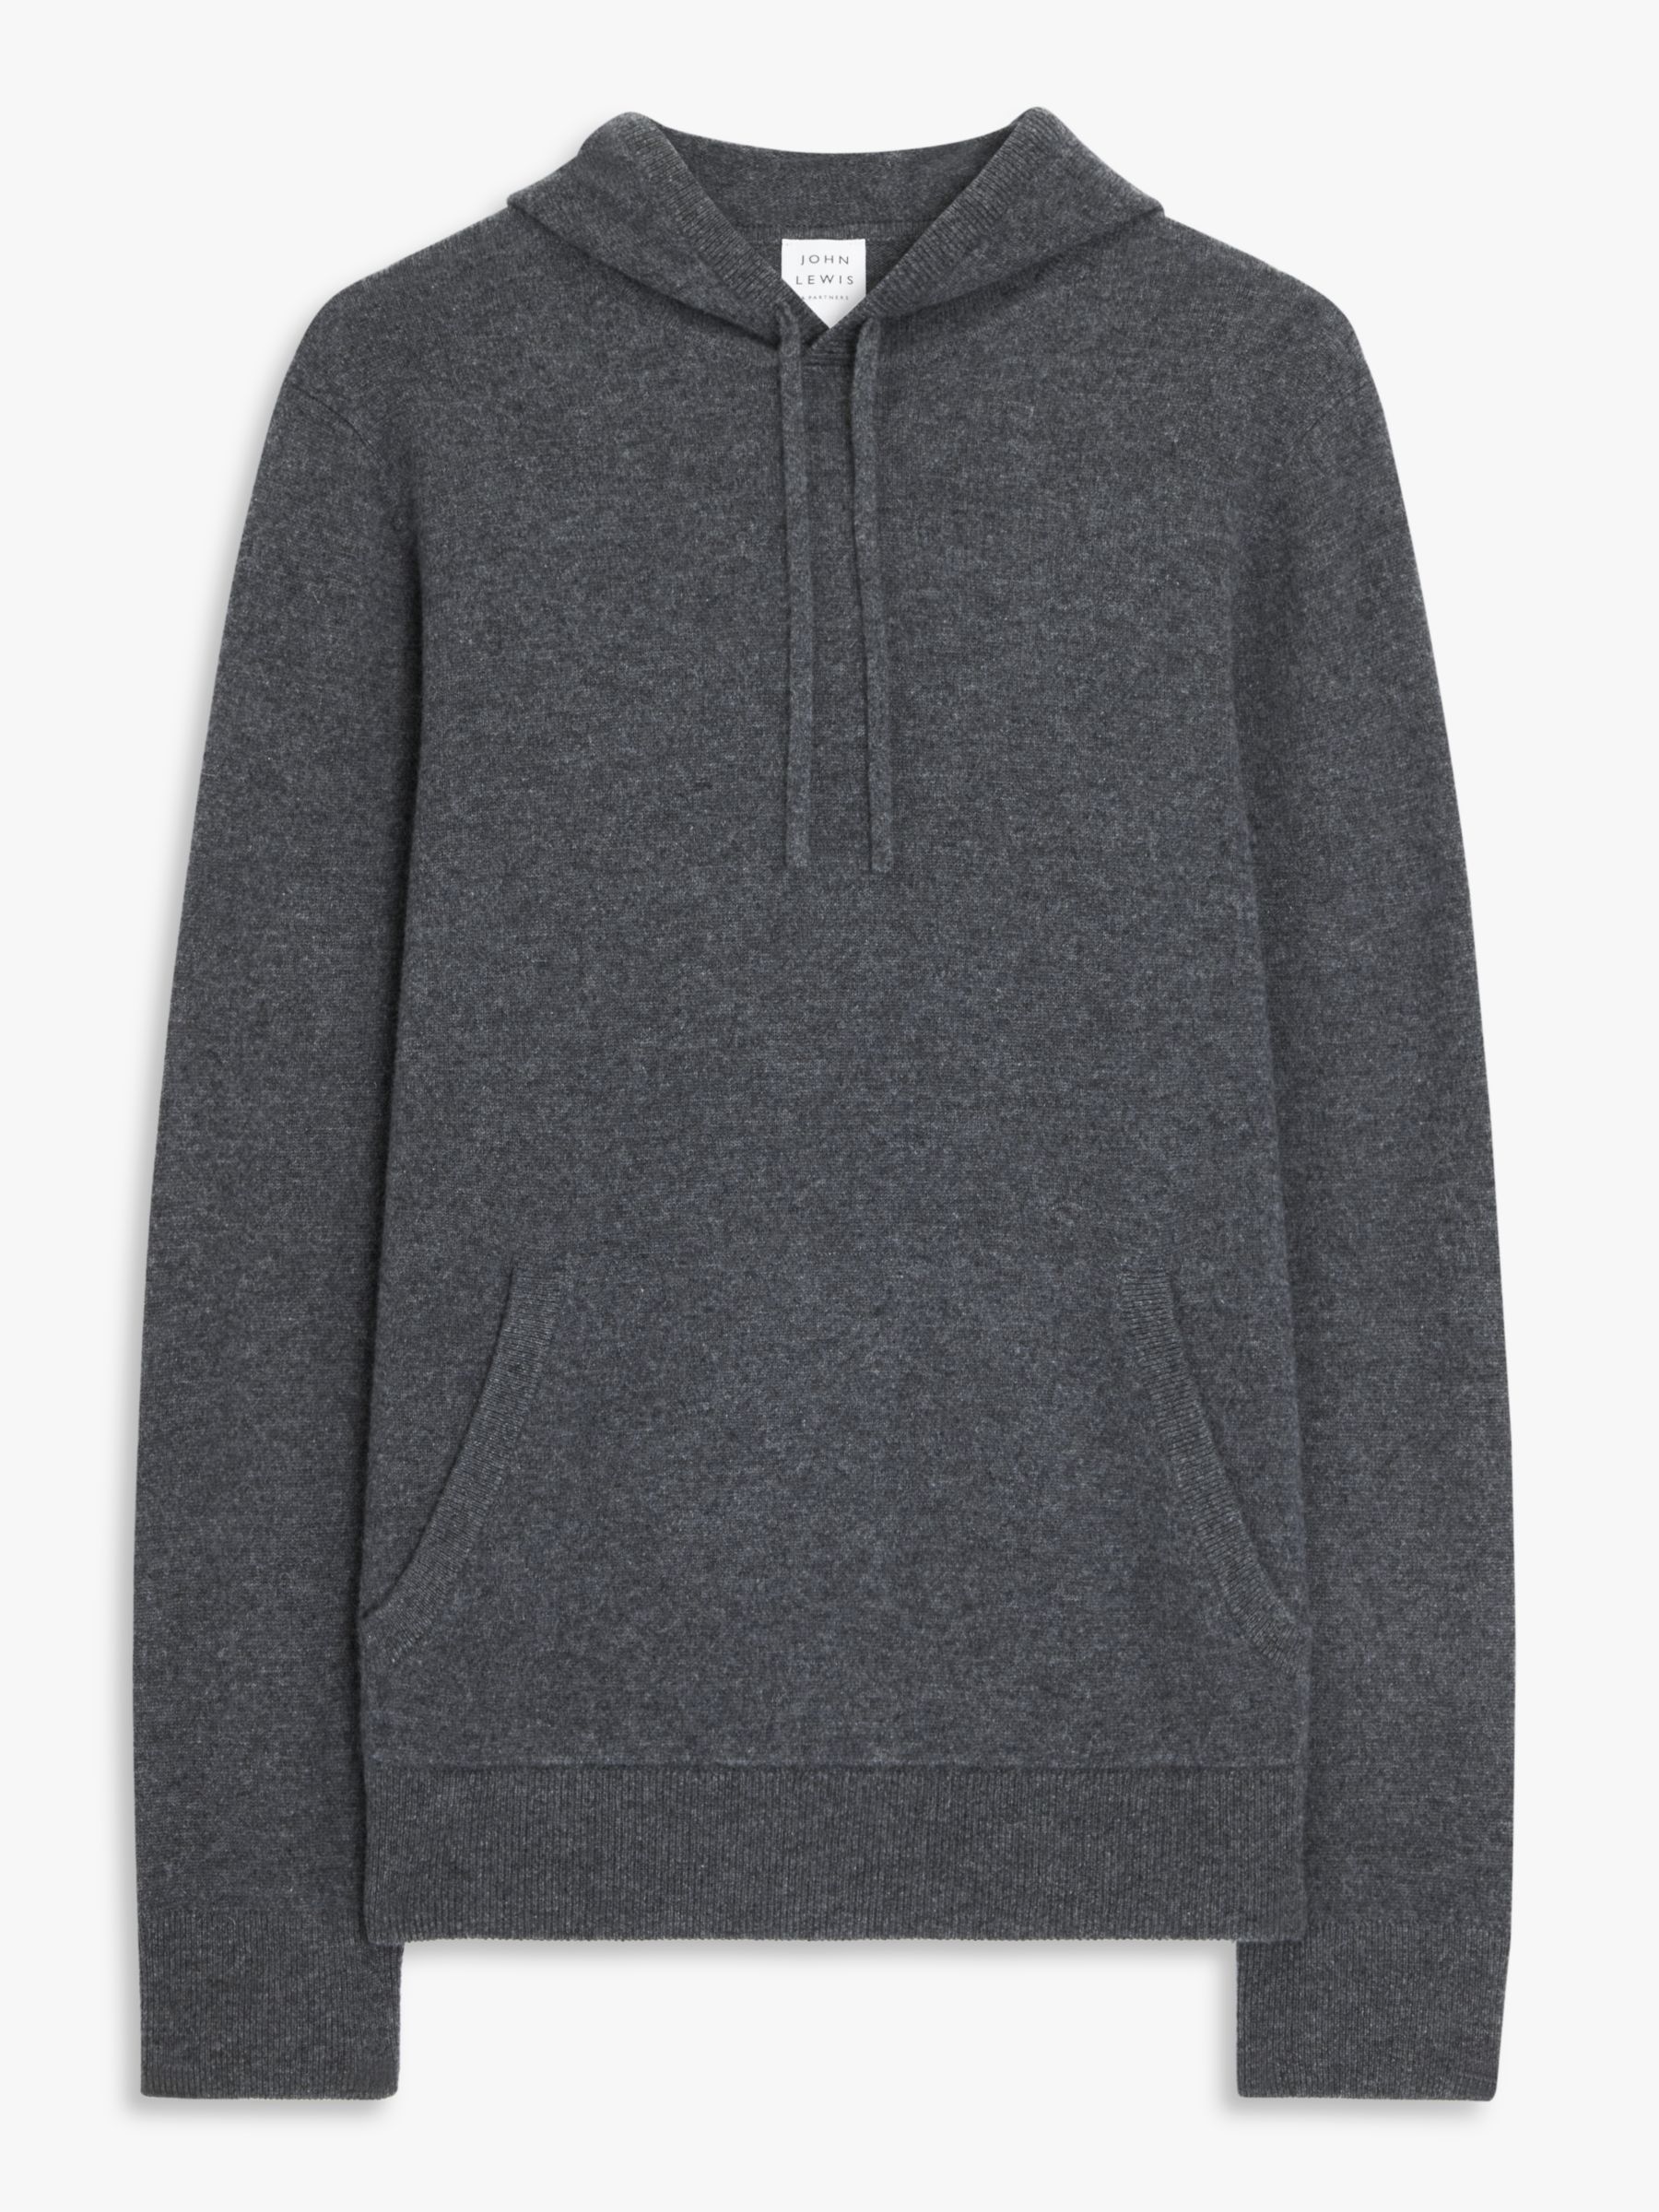 John Lewis Cashmere Hoodie, Charcoal, S